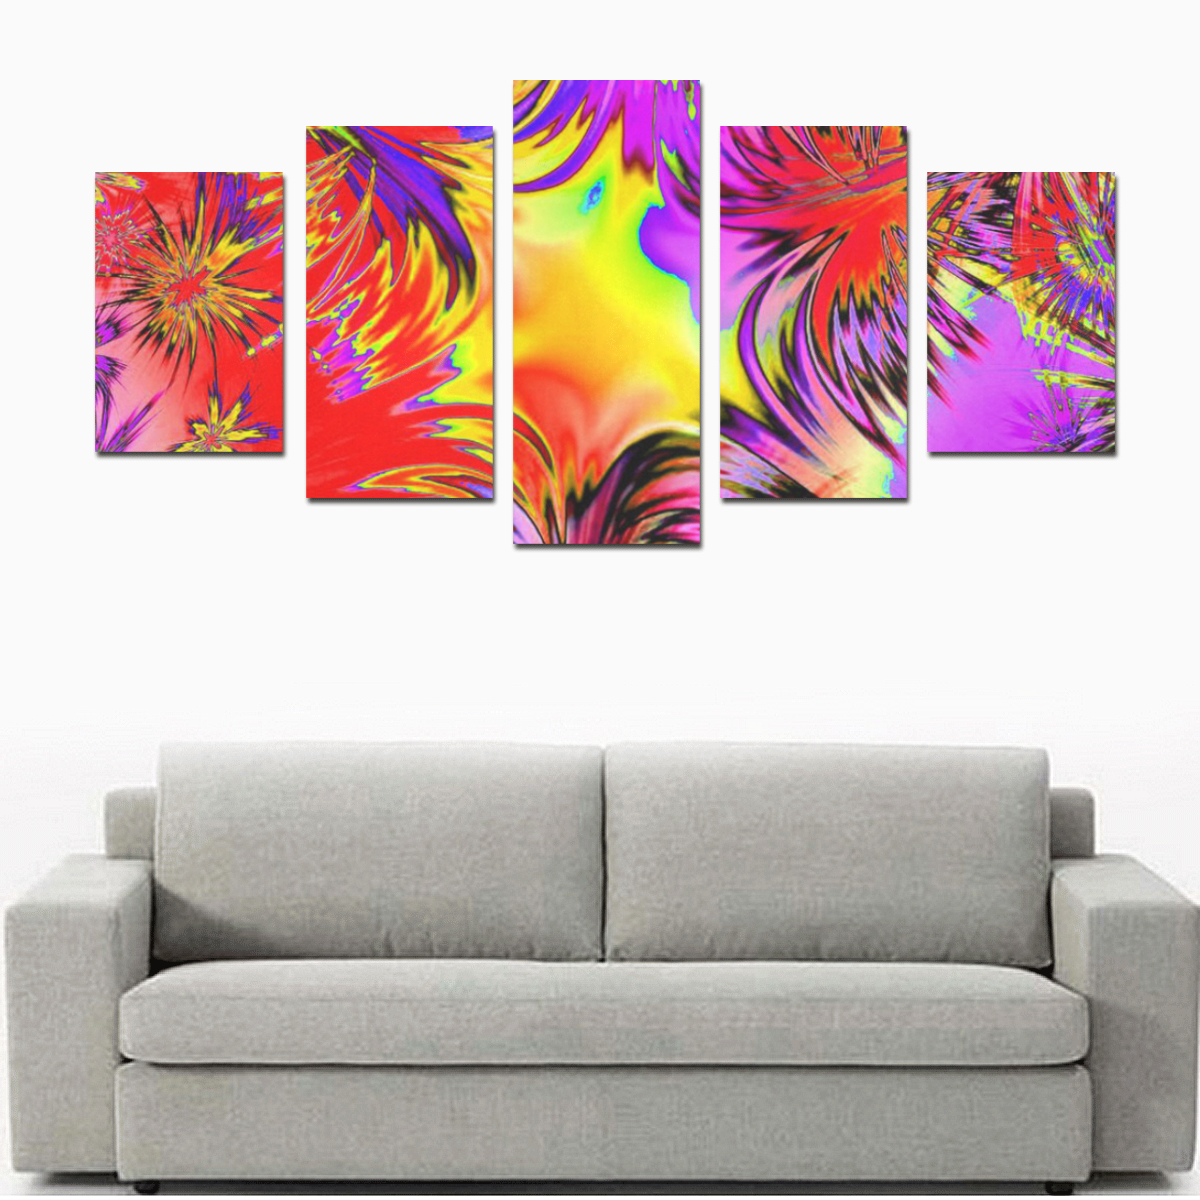 alive 4B (abstract) by JamColors Canvas Print Sets D (No Frame)